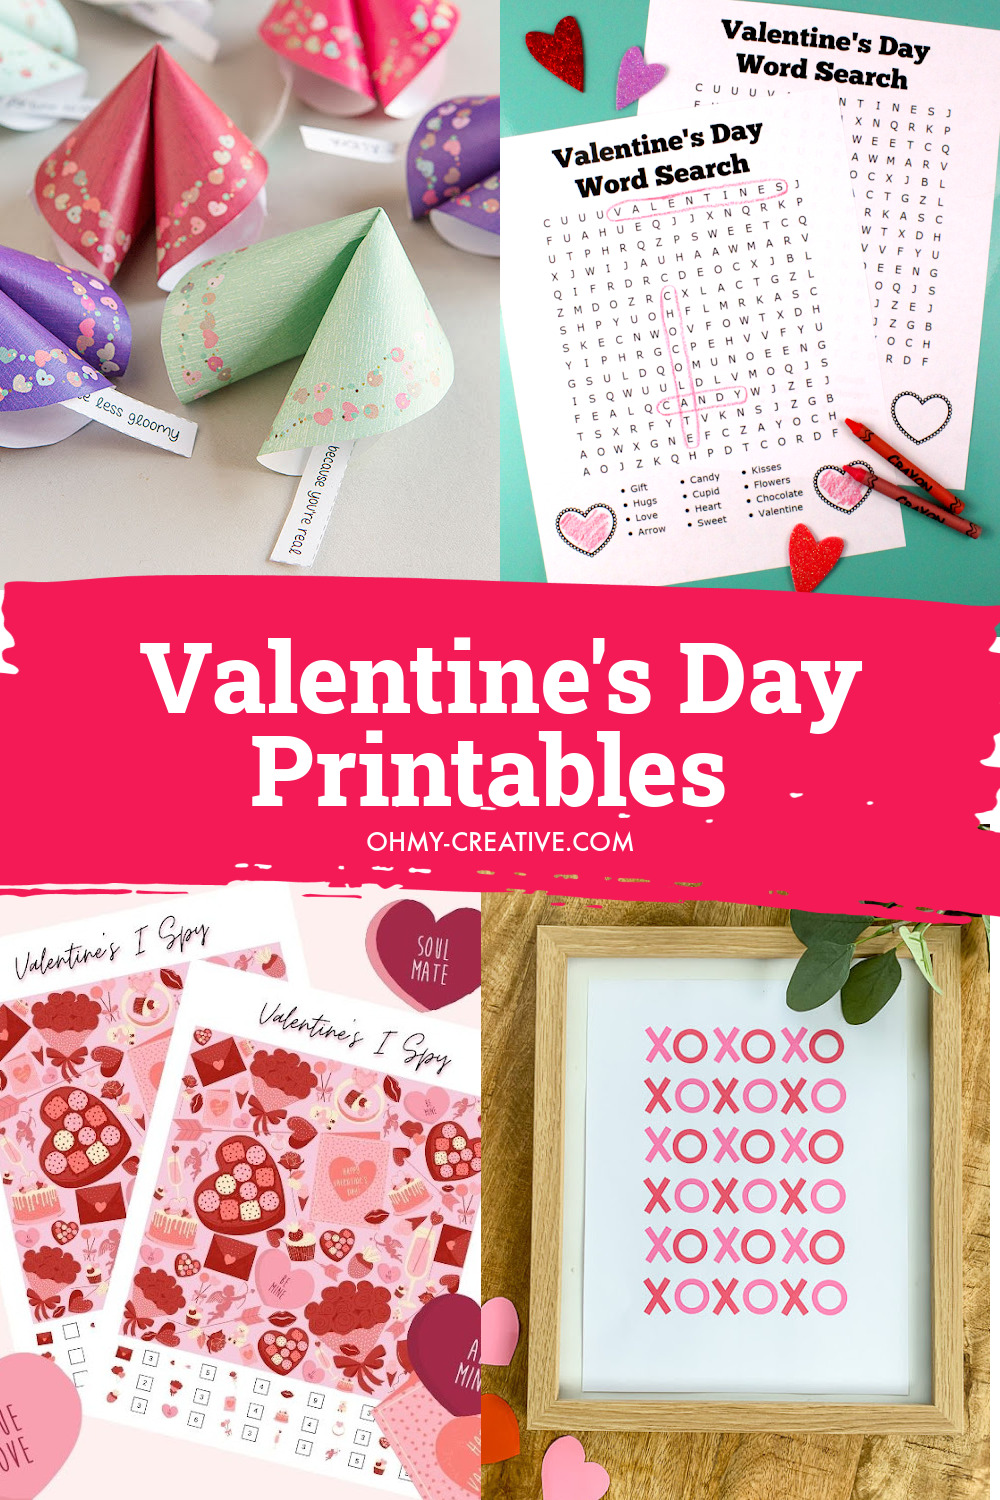 A collage of free Valentine’s Day printable cards, Valentine's Day Printable art, Valentine's Day I Spy printable, Valentine's Day printable word search and much more!